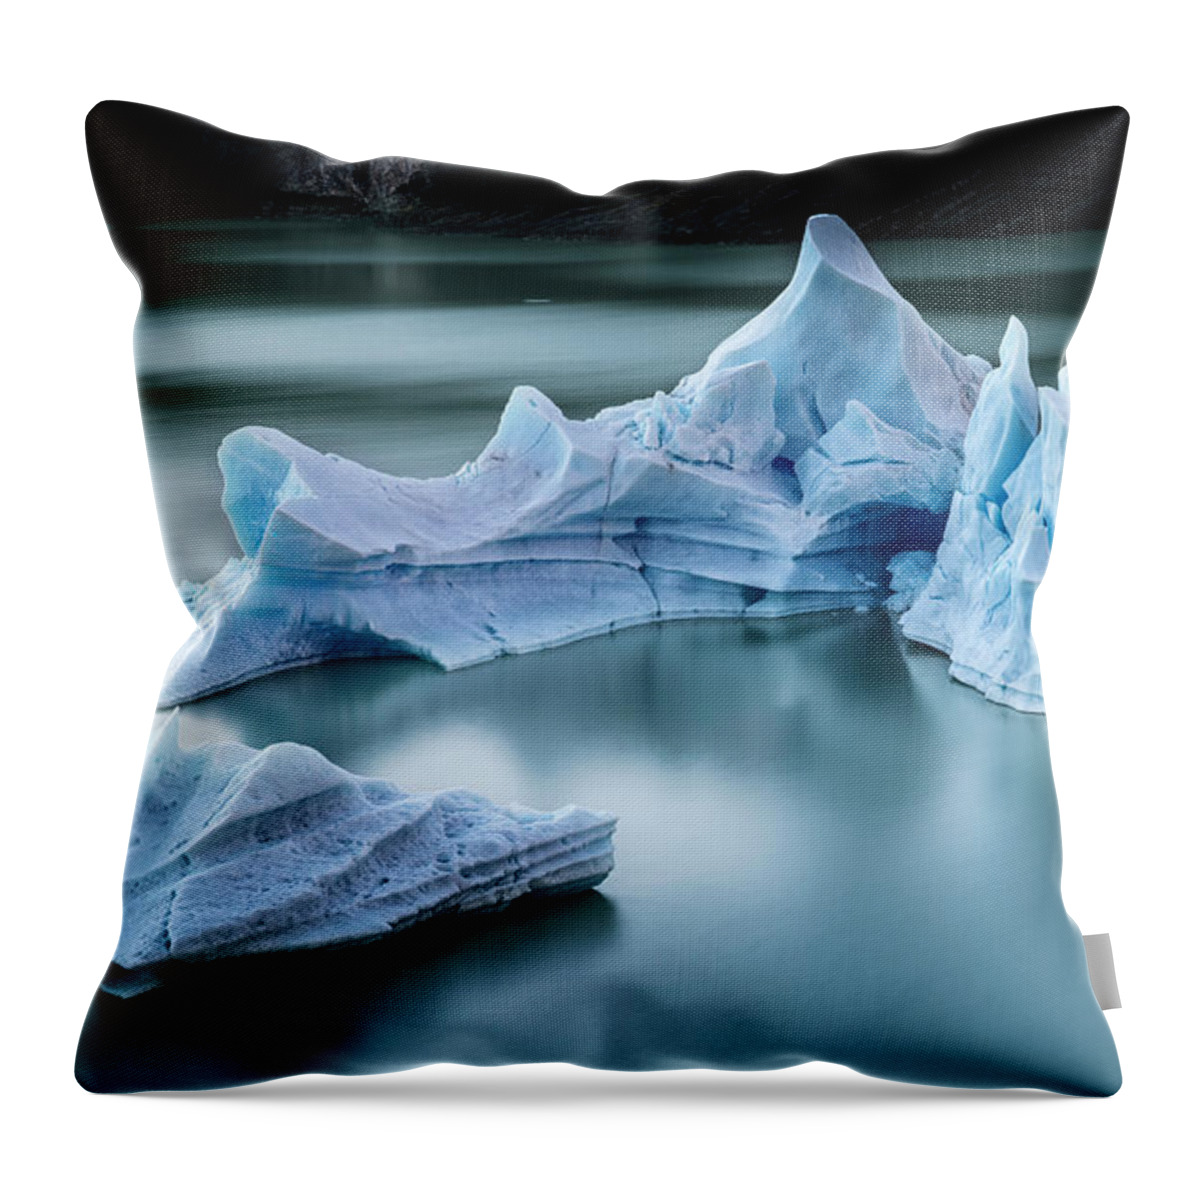 Tranquility Throw Pillow featuring the photograph Iceberg In Lake Grey In Torres Del Paine by Ignacio Palacios